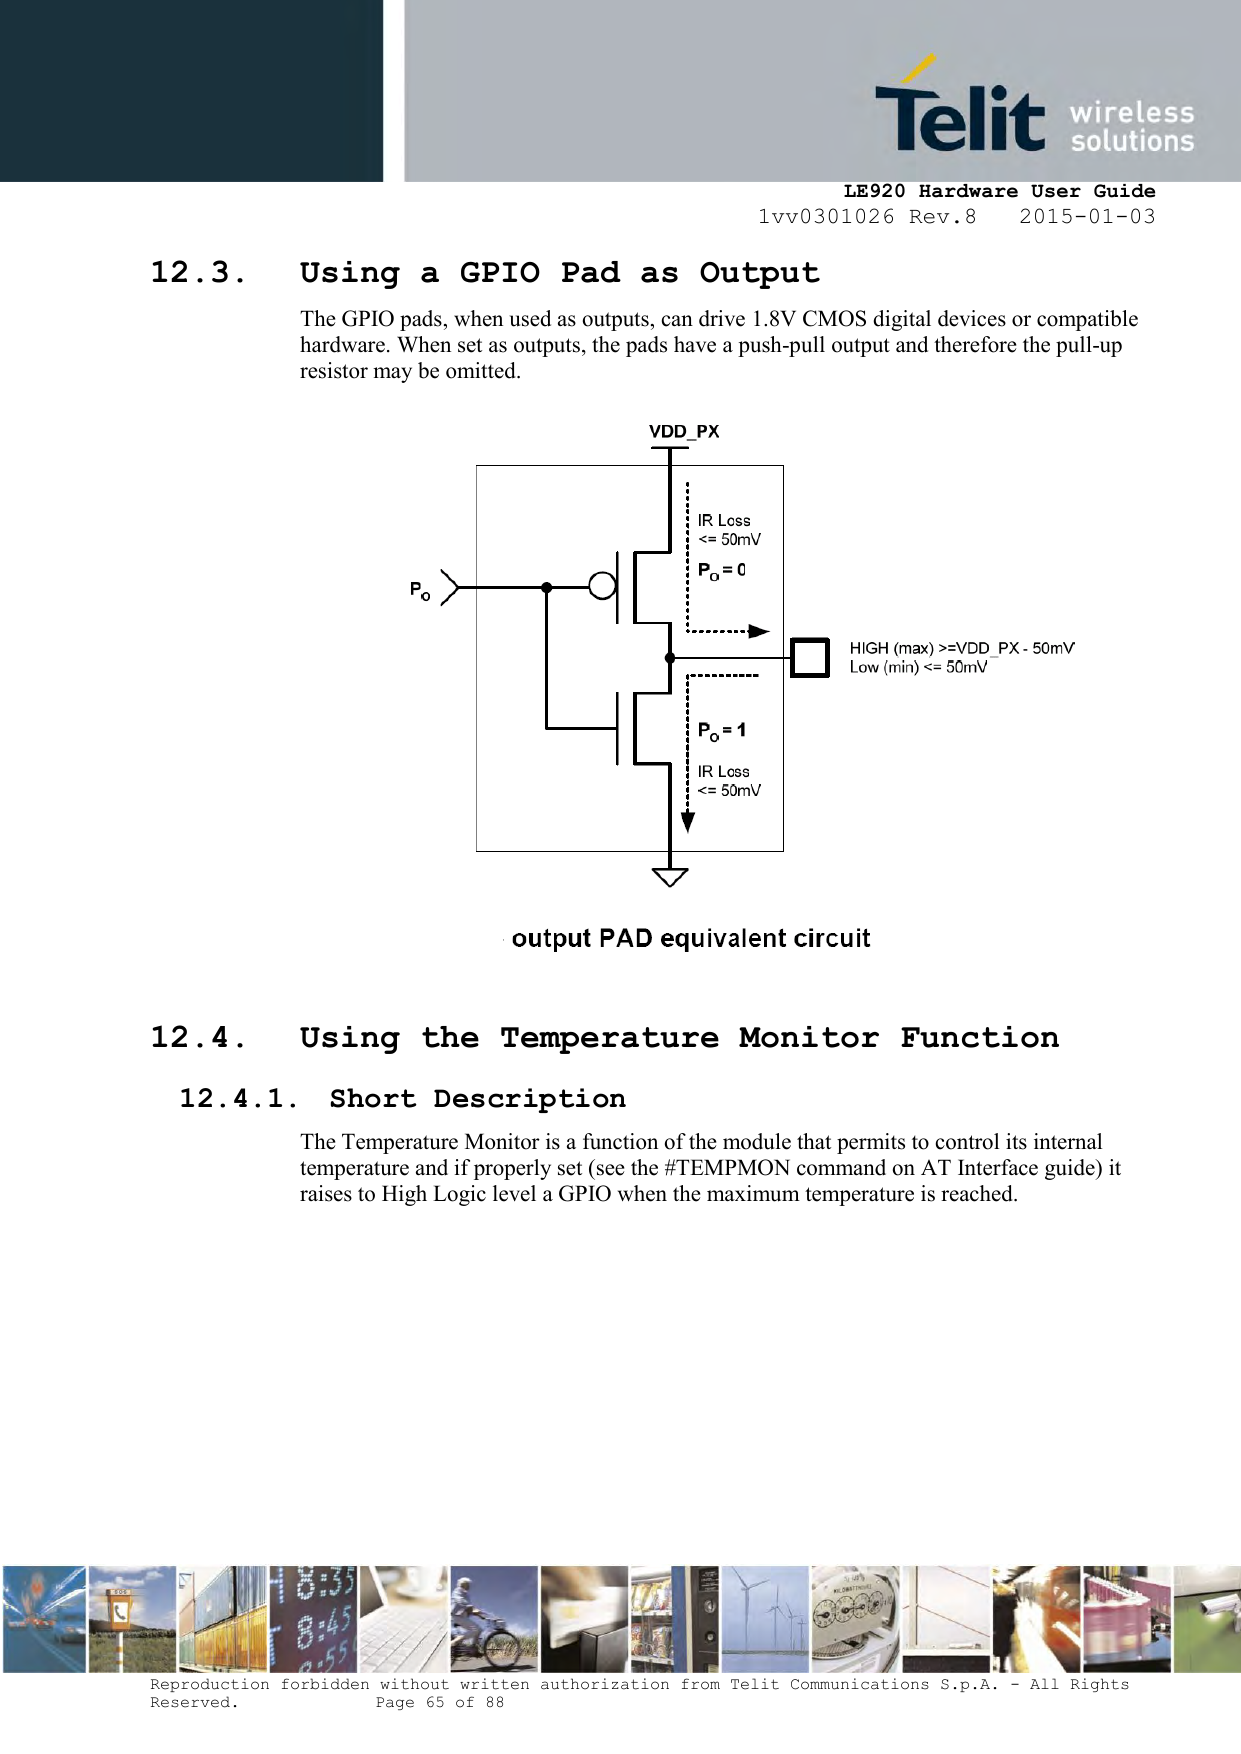     LE920 Hardware User Guide 1vv0301026 Rev.8   2015-01-03 Reproduction forbidden without written authorization from Telit Communications S.p.A. - All Rights Reserved.    Page 65 of 88  12.3. Using a GPIO Pad as Output The GPIO pads, when used as outputs, can drive 1.8V CMOS digital devices or compatible hardware. When set as outputs, the pads have a push-pull output and therefore the pull-up resistor may be omitted.   12.4. Using the Temperature Monitor Function 12.4.1. Short Description The Temperature Monitor is a function of the module that permits to control its internal temperature and if properly set (see the #TEMPMON command on AT Interface guide) it raises to High Logic level a GPIO when the maximum temperature is reached.      